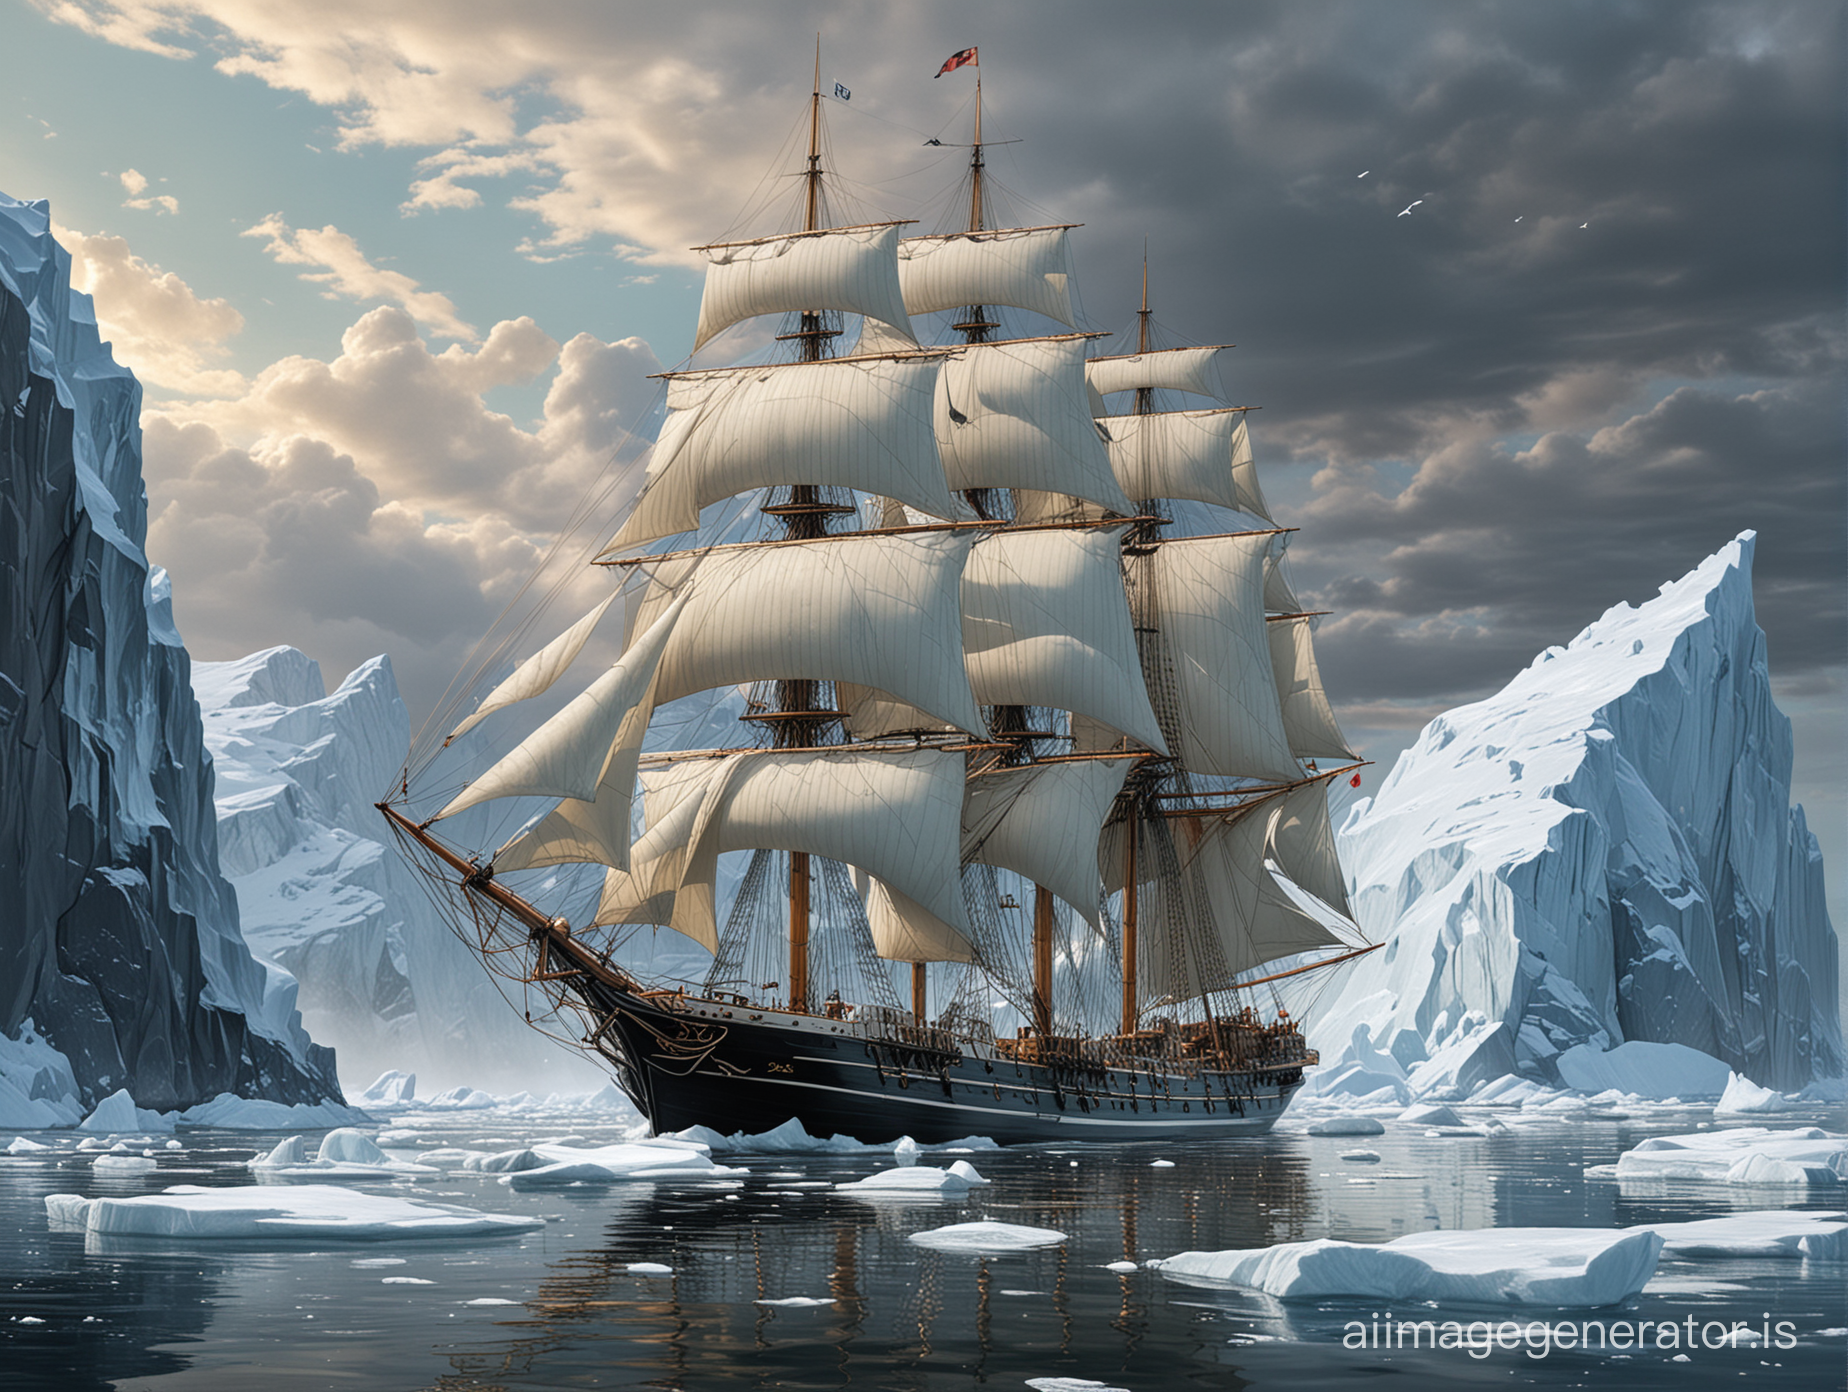 Calm sea on the far North, a majestic 6-masted windjammer ship sailing gracefully, surrounded by towering icebergs, reminiscent of the artistic style of Winslow Homer, realistic oil painting, capturing the raw beauty of nature, dramatic lighting, 4K resolution, wide angle composition, marine art, maritime painting.